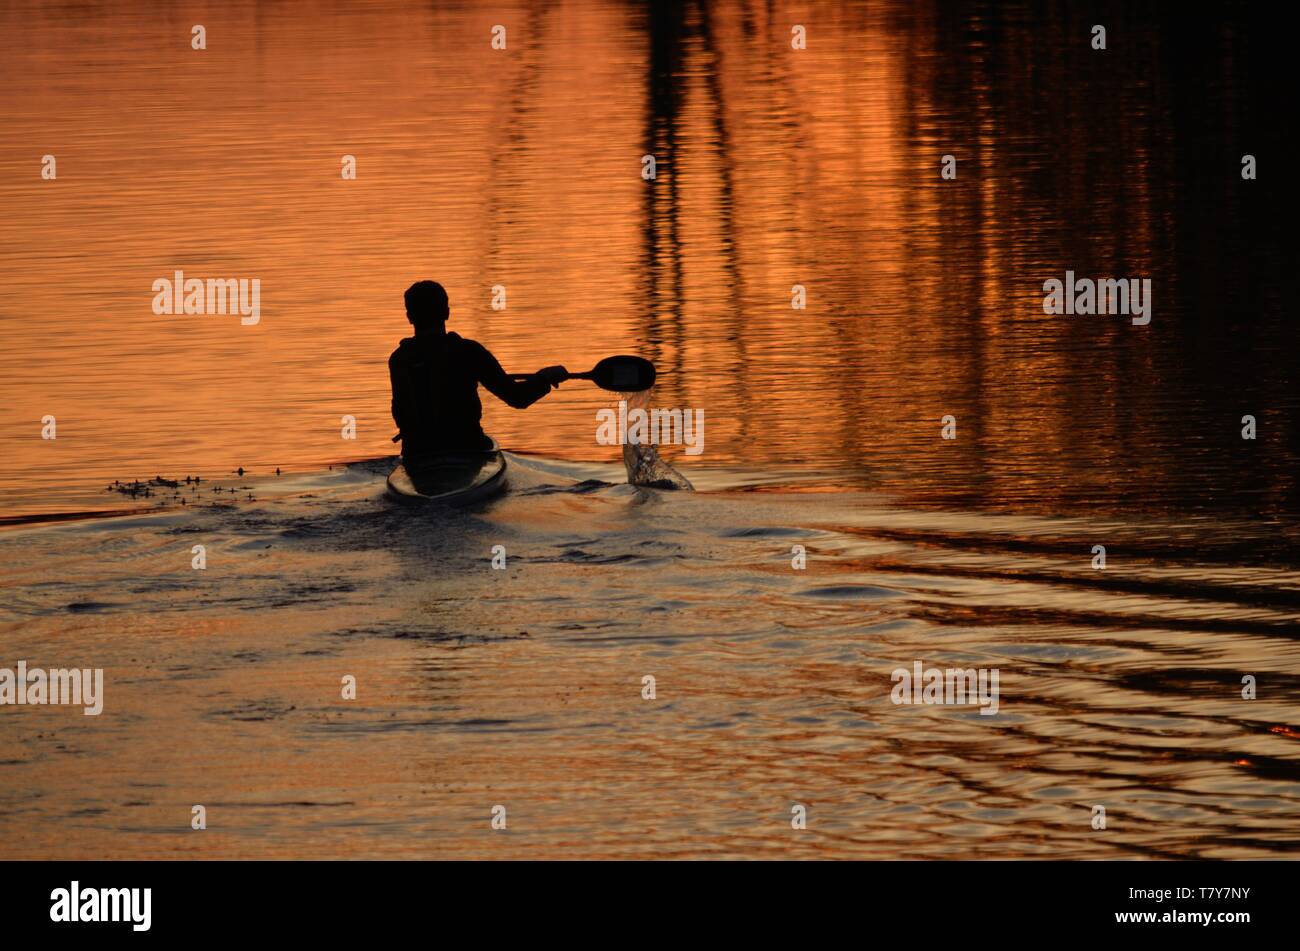 Silhouette of a canoeist paddling into sunset reflection on River Avon Stock Photo